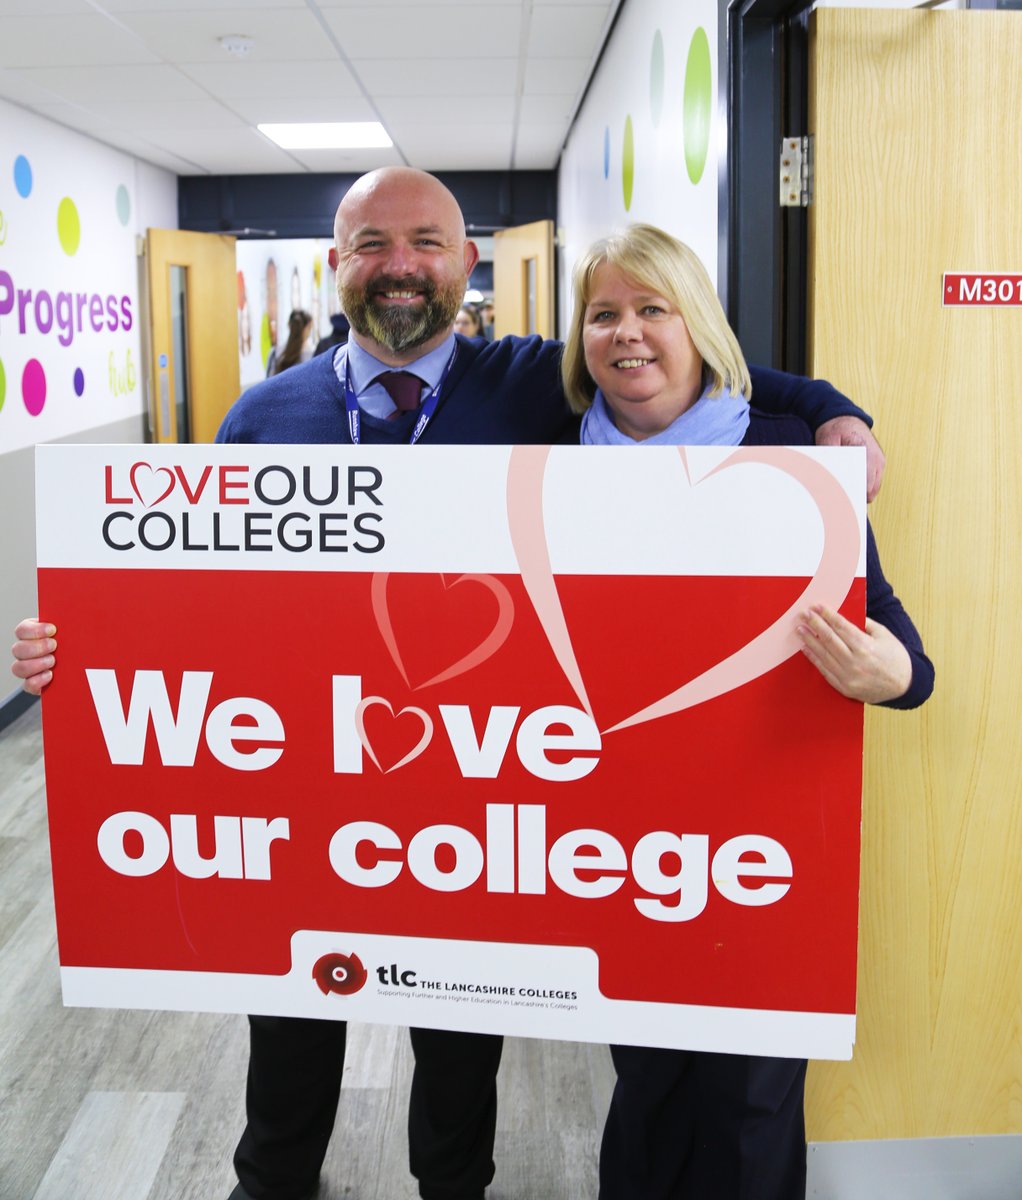 This week we've been celebrating and showcasing how colleges support local skills ahead of this year' elections.

#CollegesWeek2024 #LoveOurColleges @AoC_info